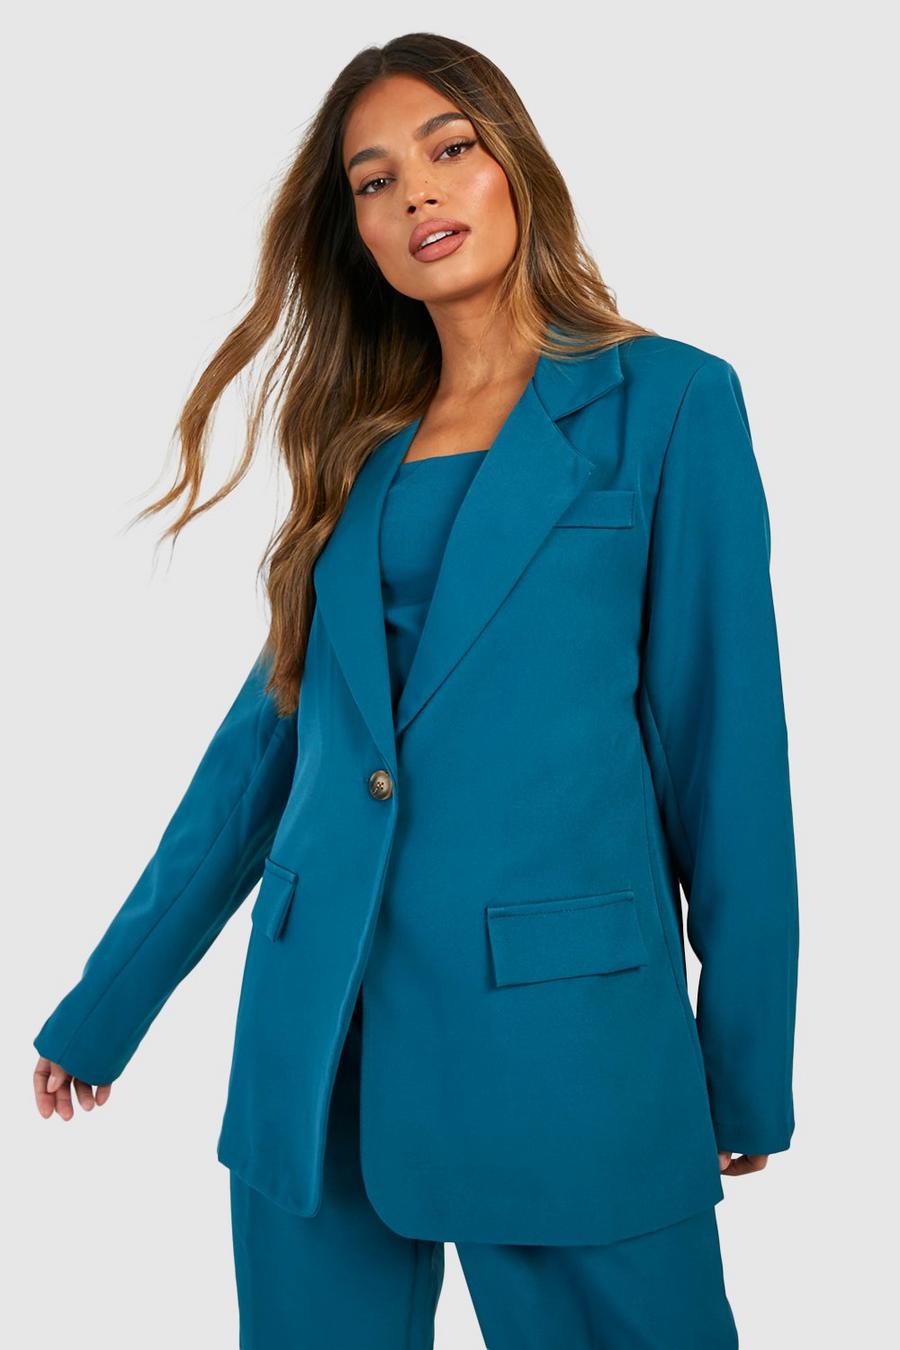 Single Button Suit Jacket, Blazer for Ladies, Shop Today. Get it Tomorrow!